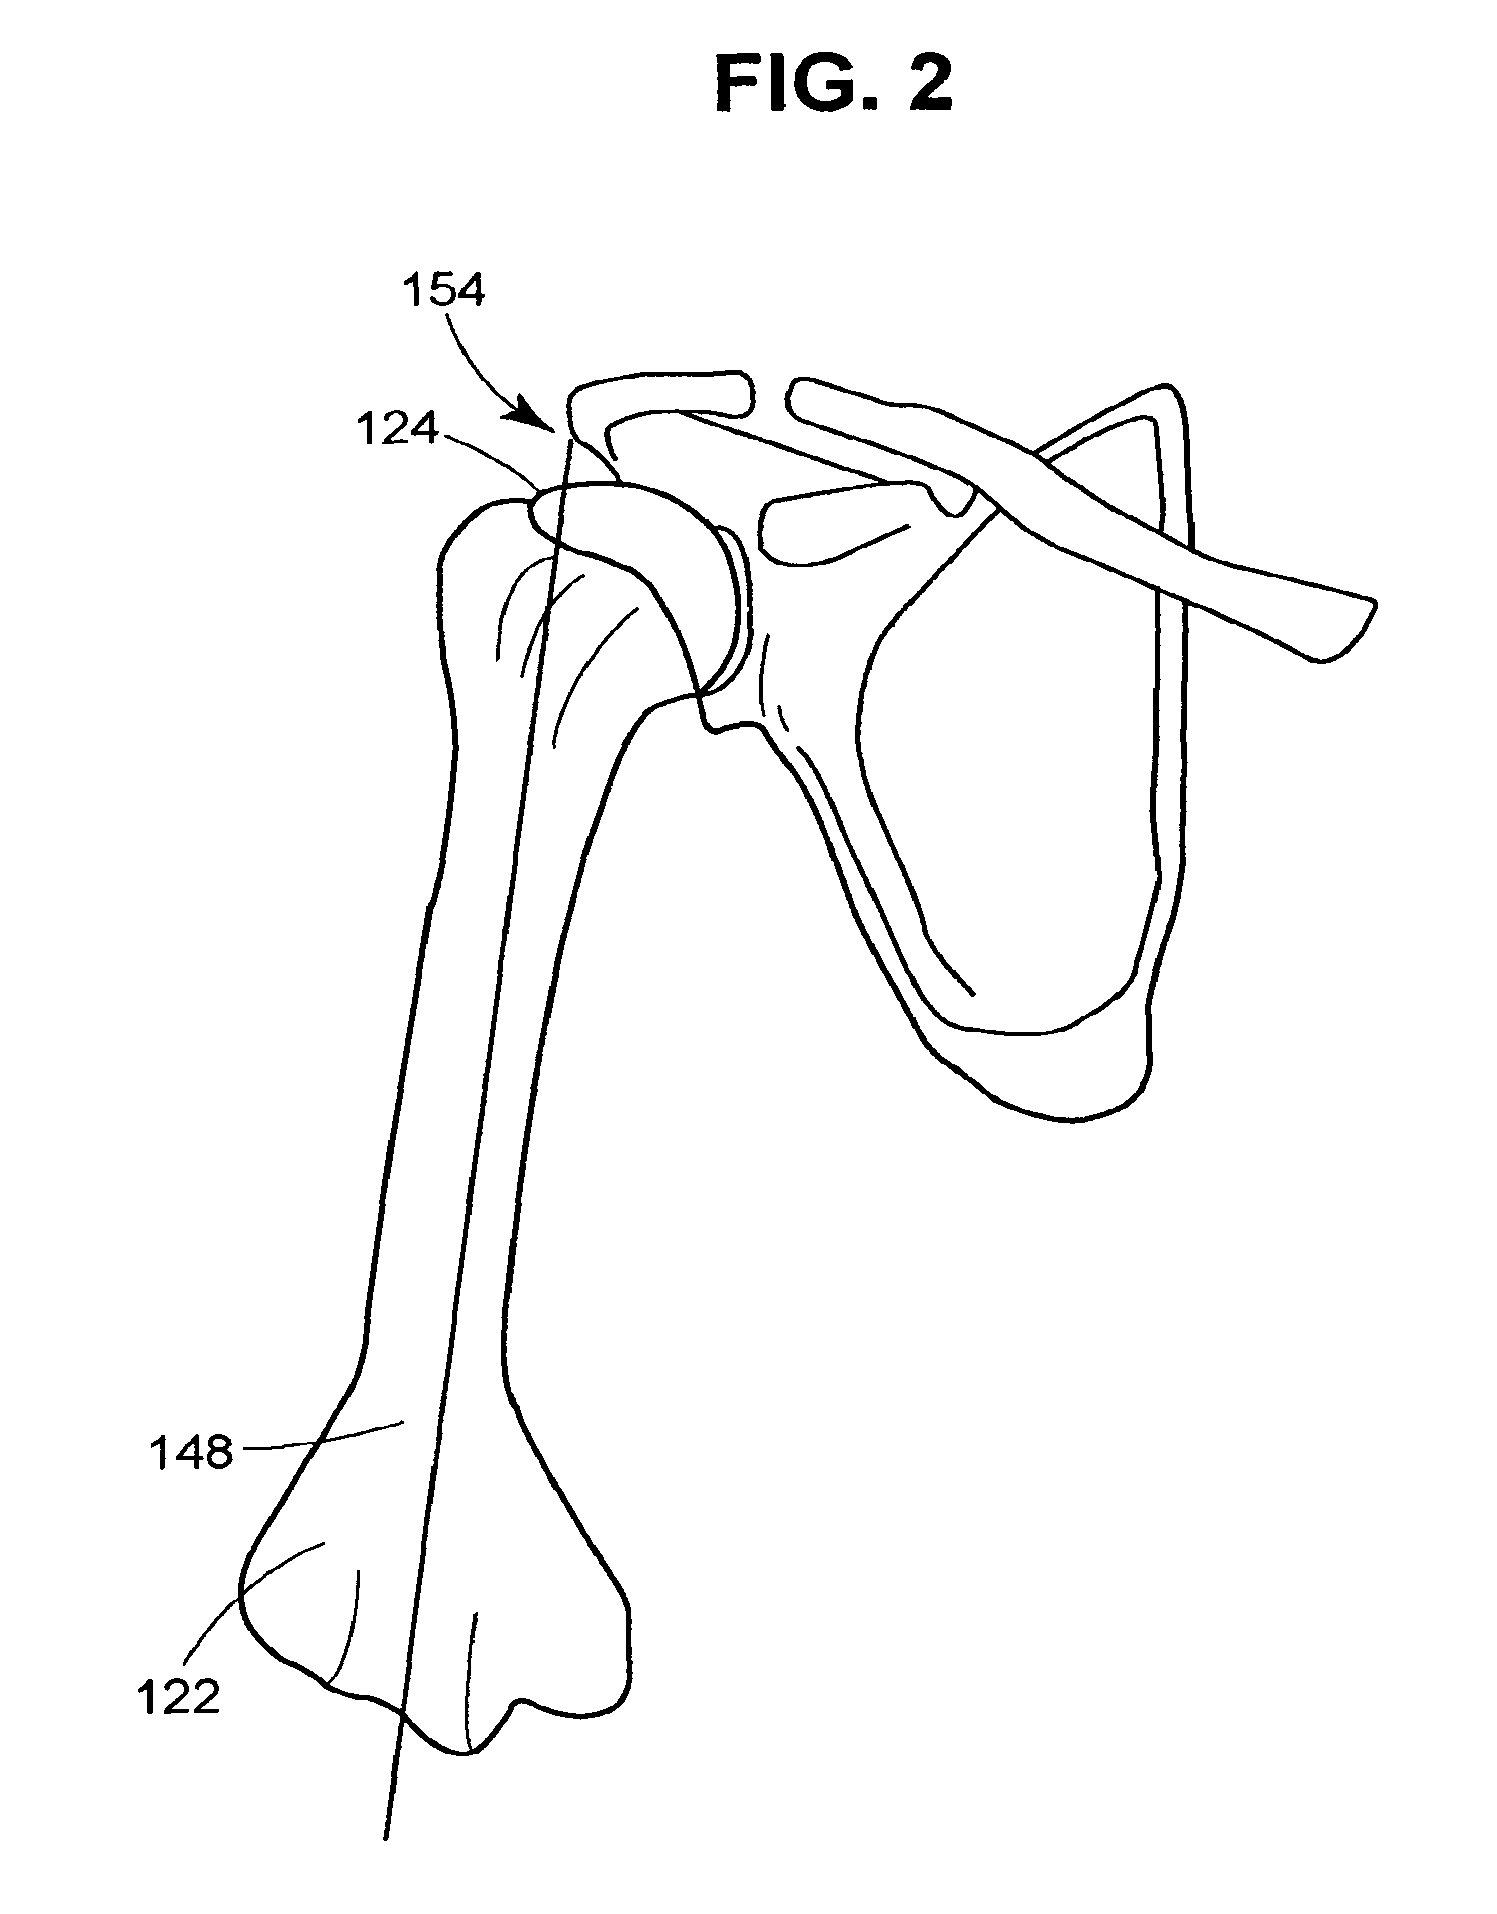 System and method for performing arthroplasty of a joint and tracking a plumb line plane